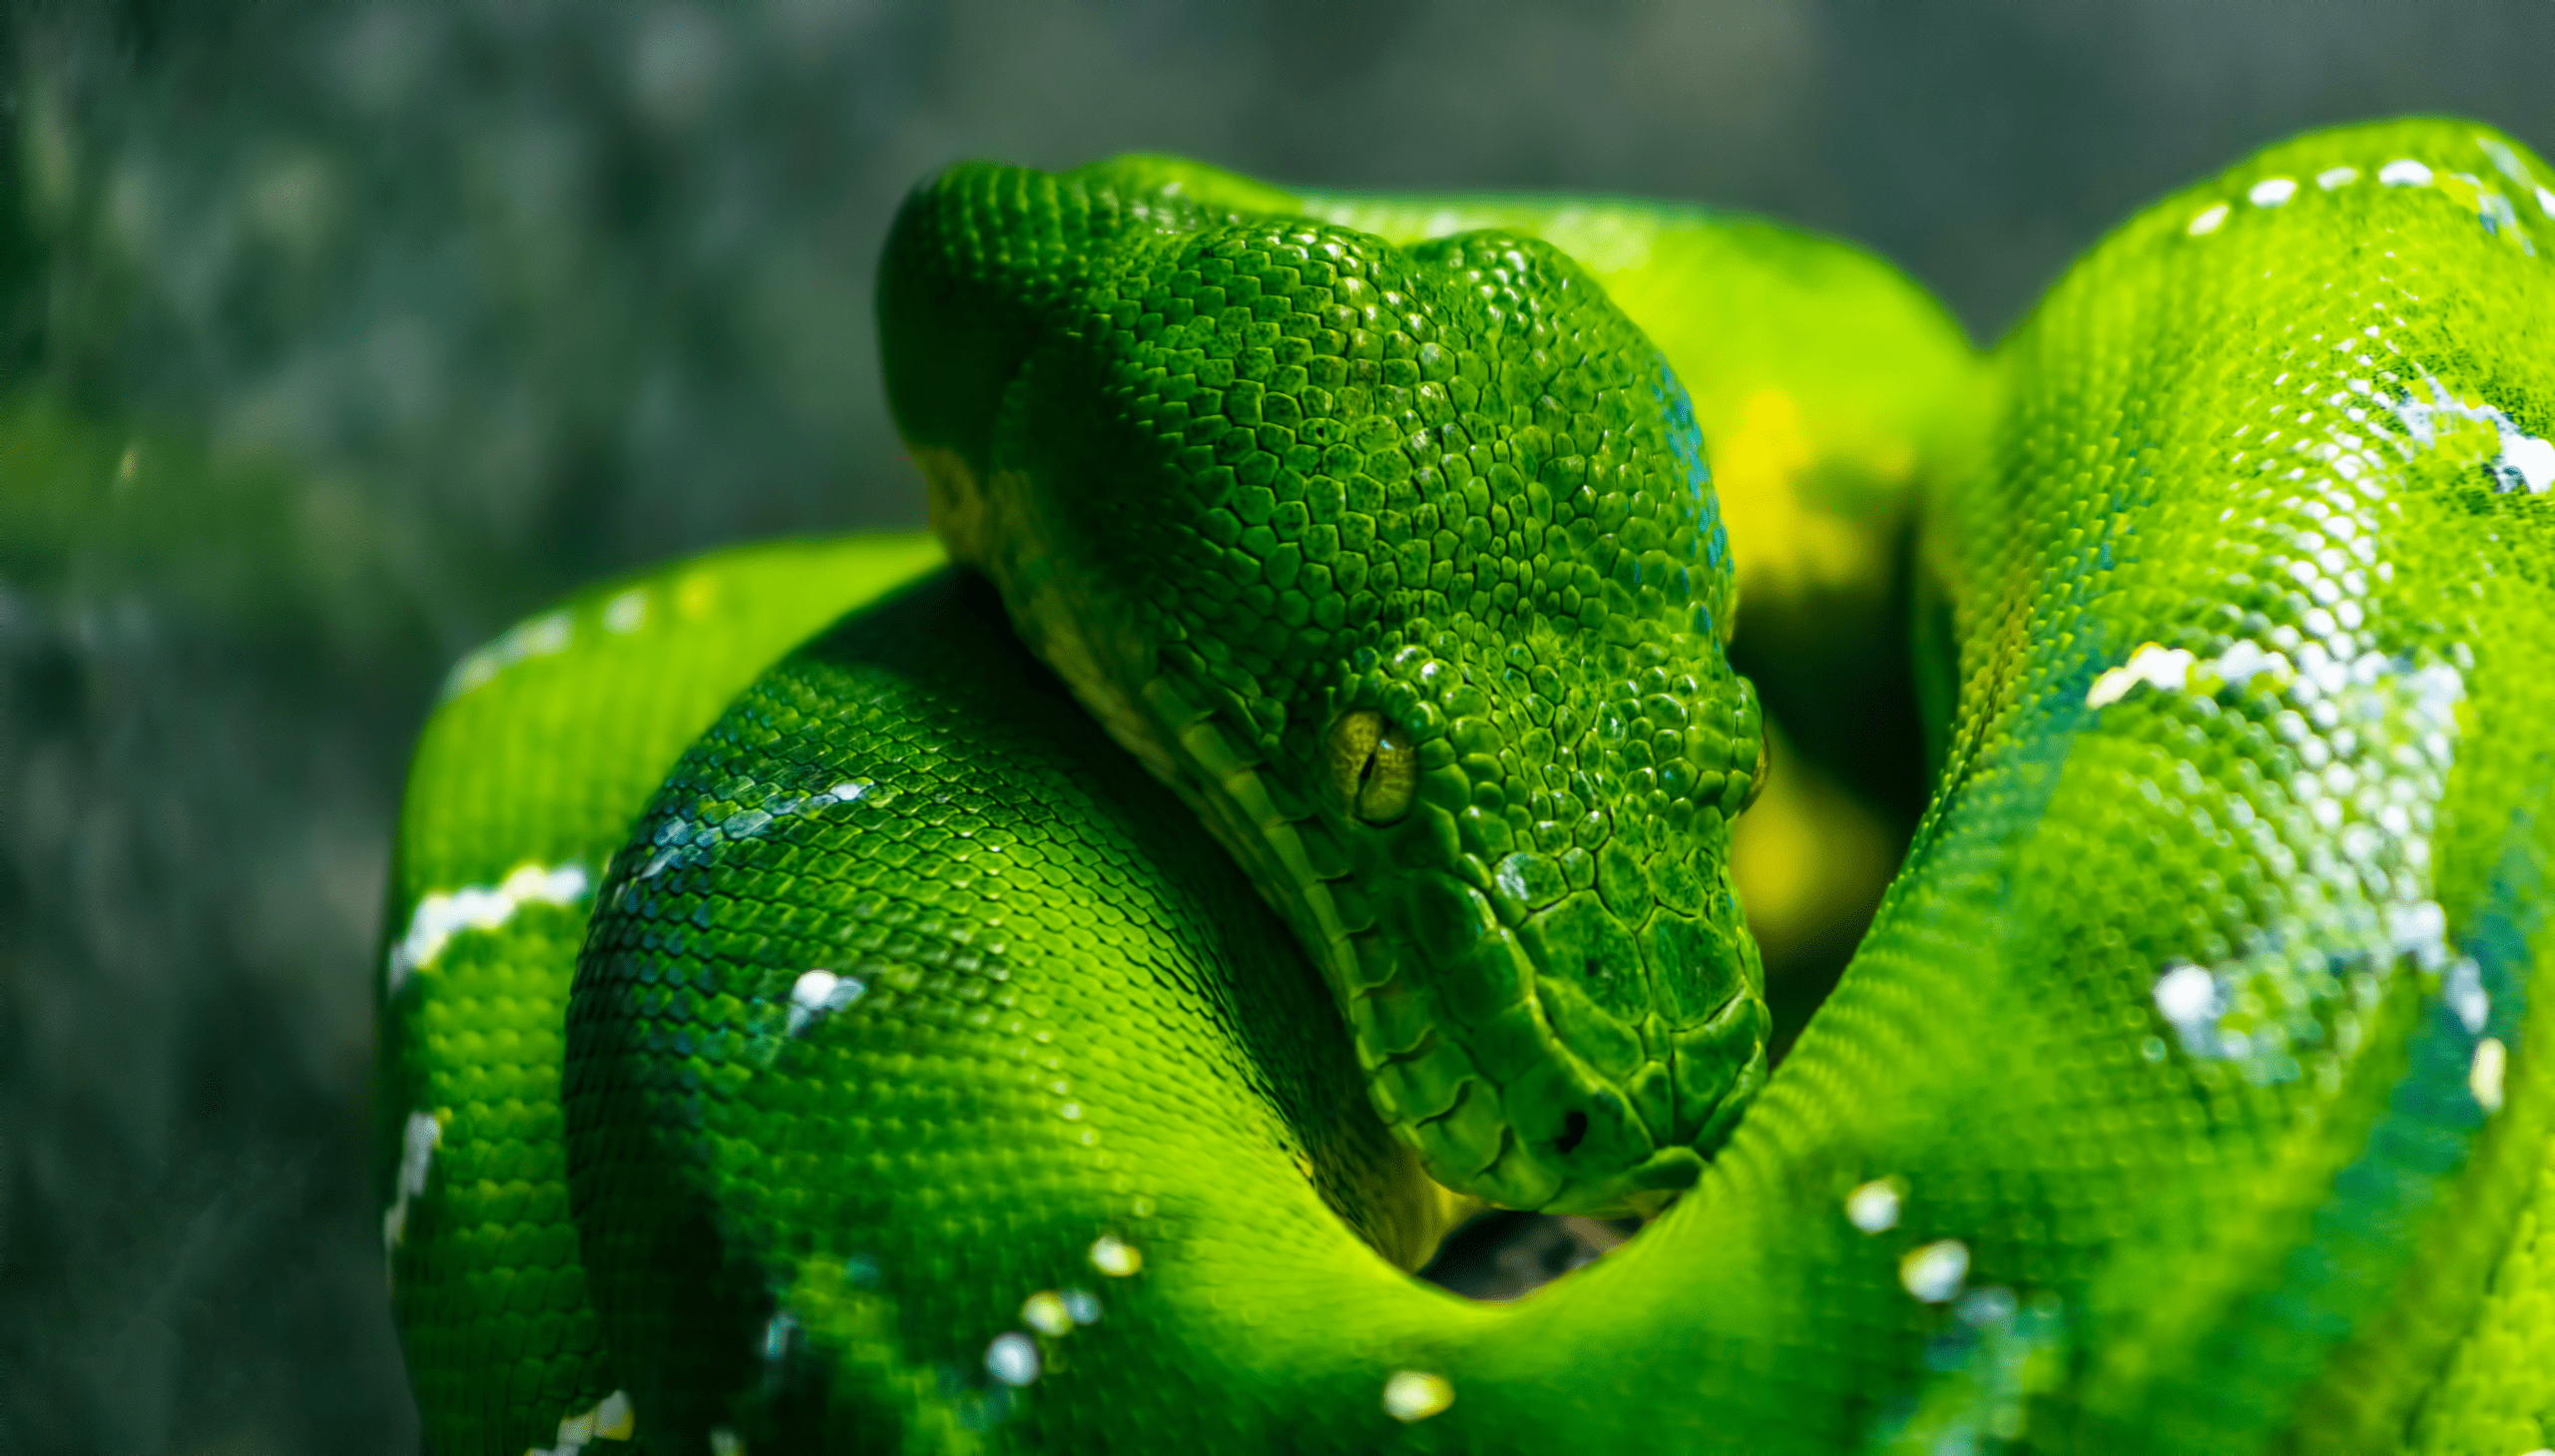 Pet Emerald Tree Boa coiled up on a branch